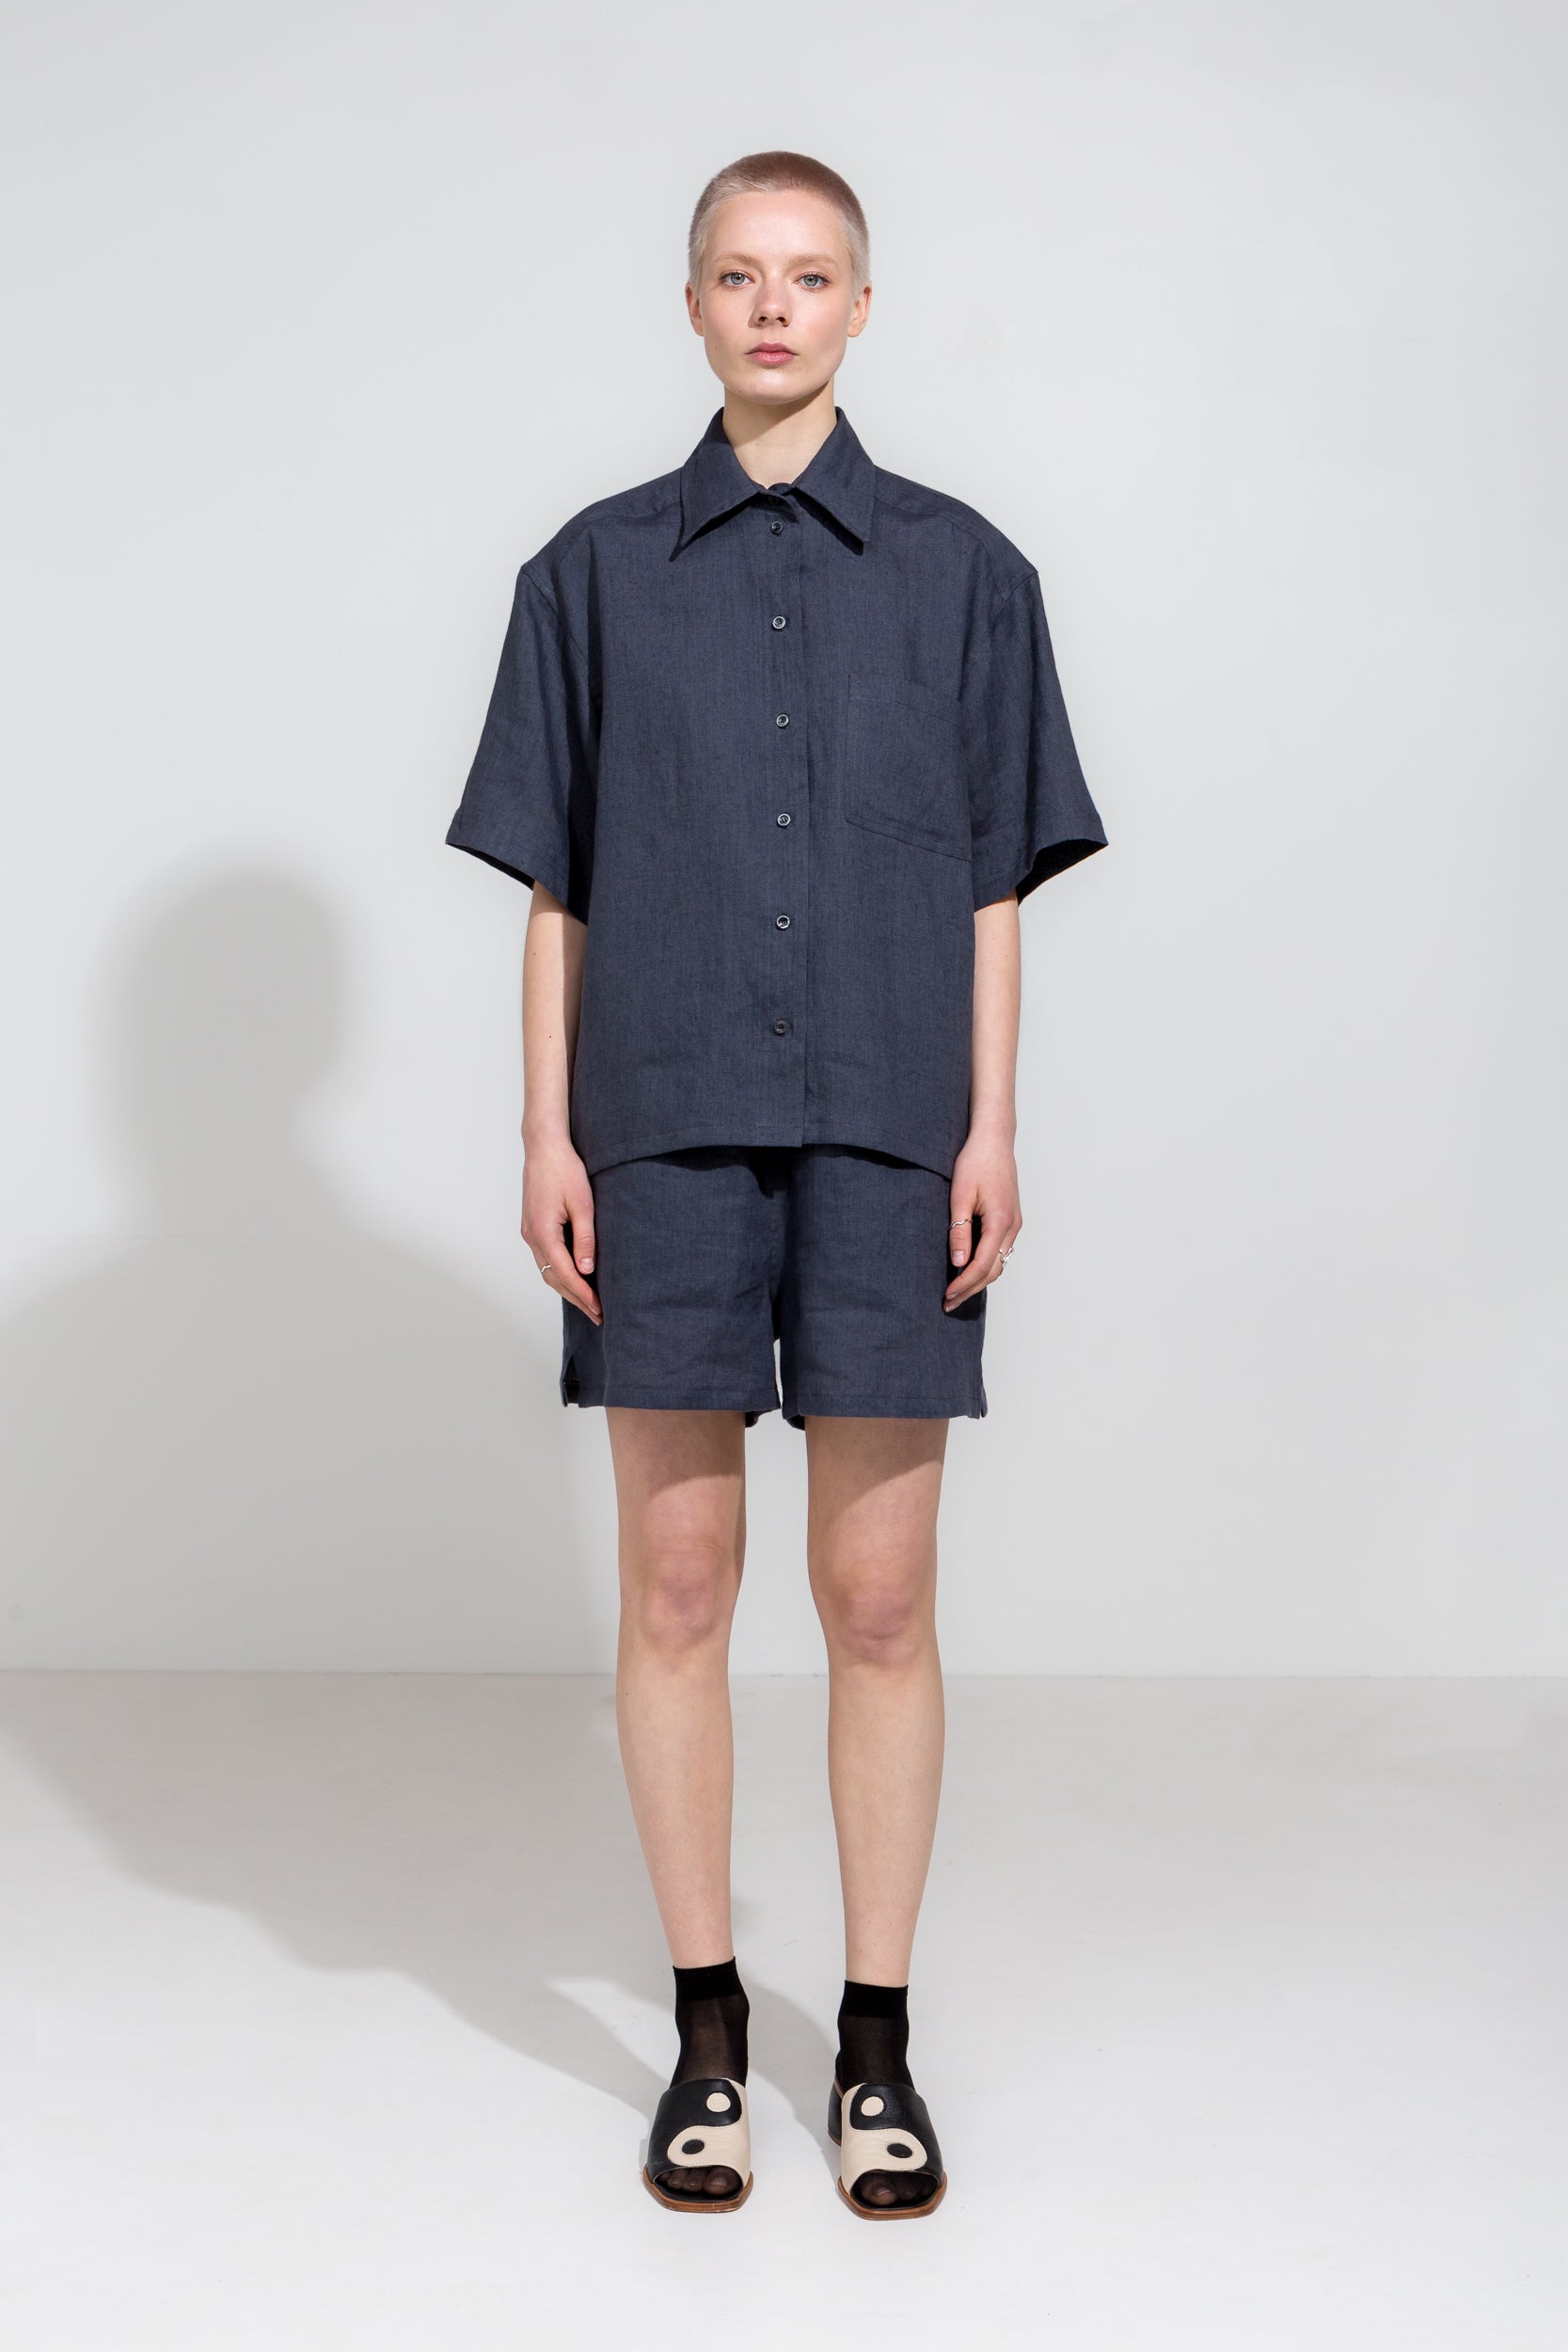 Relaxed fit short sleeve shirt and shorts in asphalt grey linen